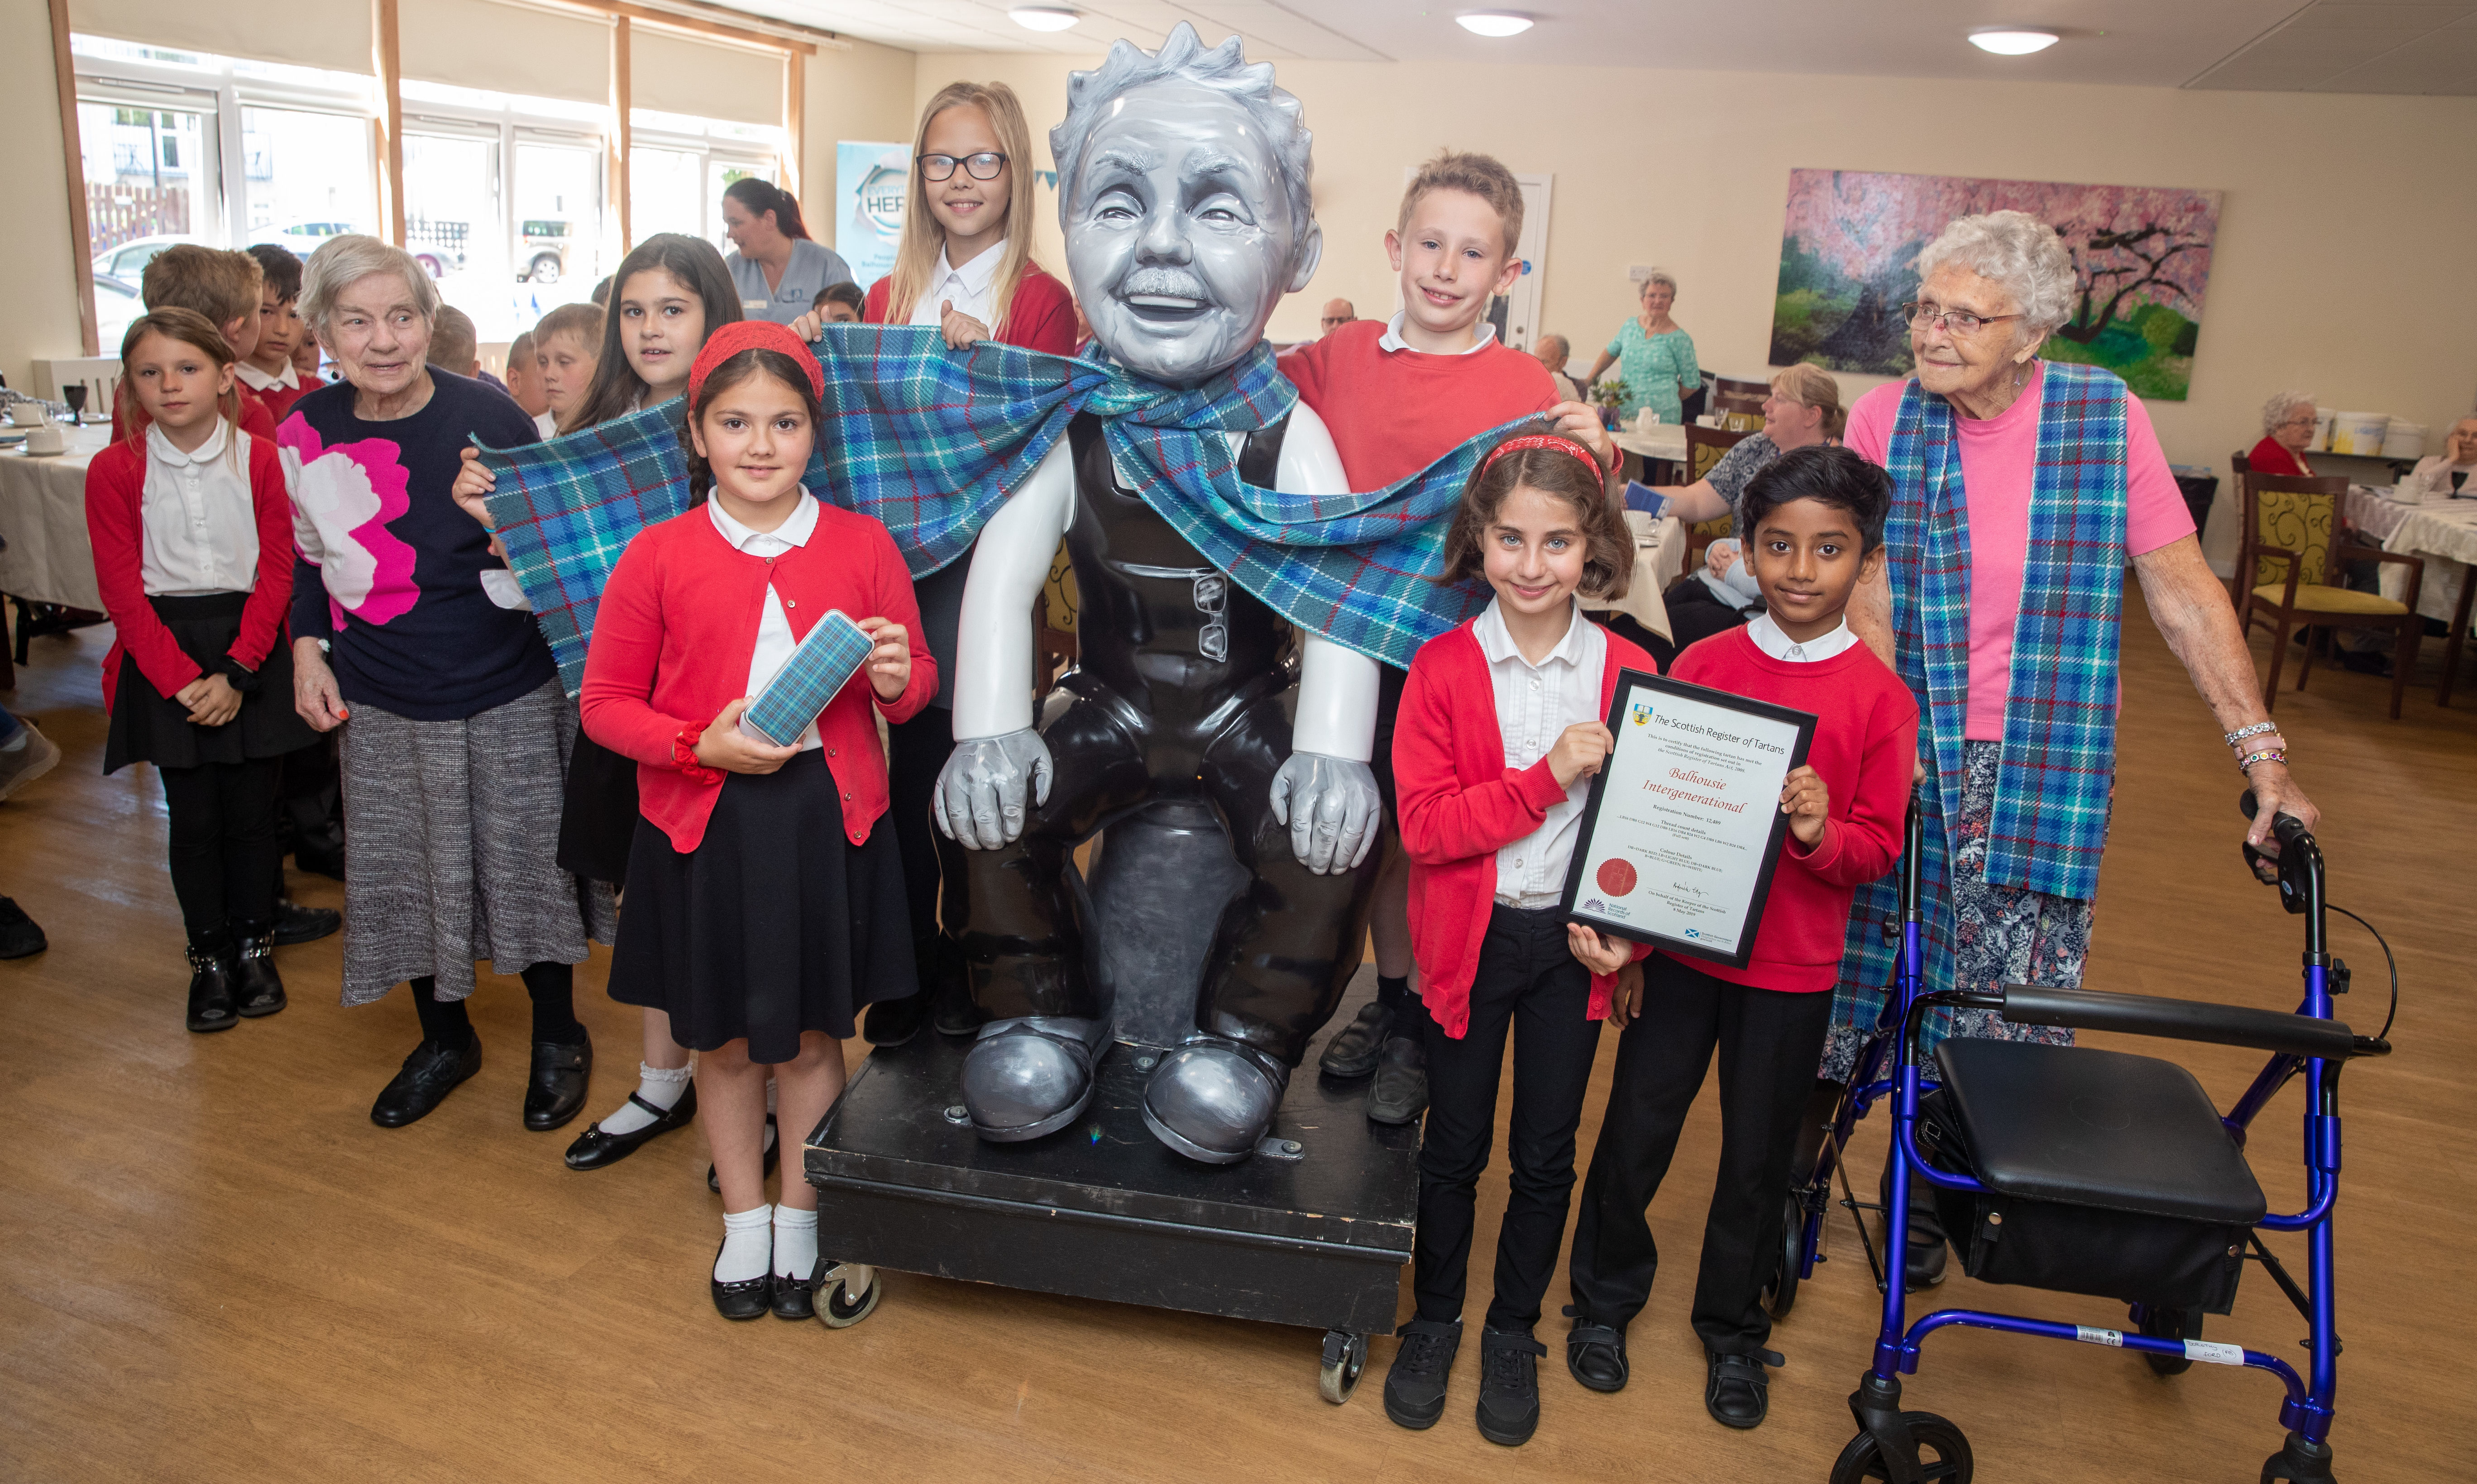 Residents of Balhousie North Inch North Grove and pupils from Balhousie Primary School celebrated the launch of their new Balhousie tartan, created in association with the Weaver Incorporation of Dundee.